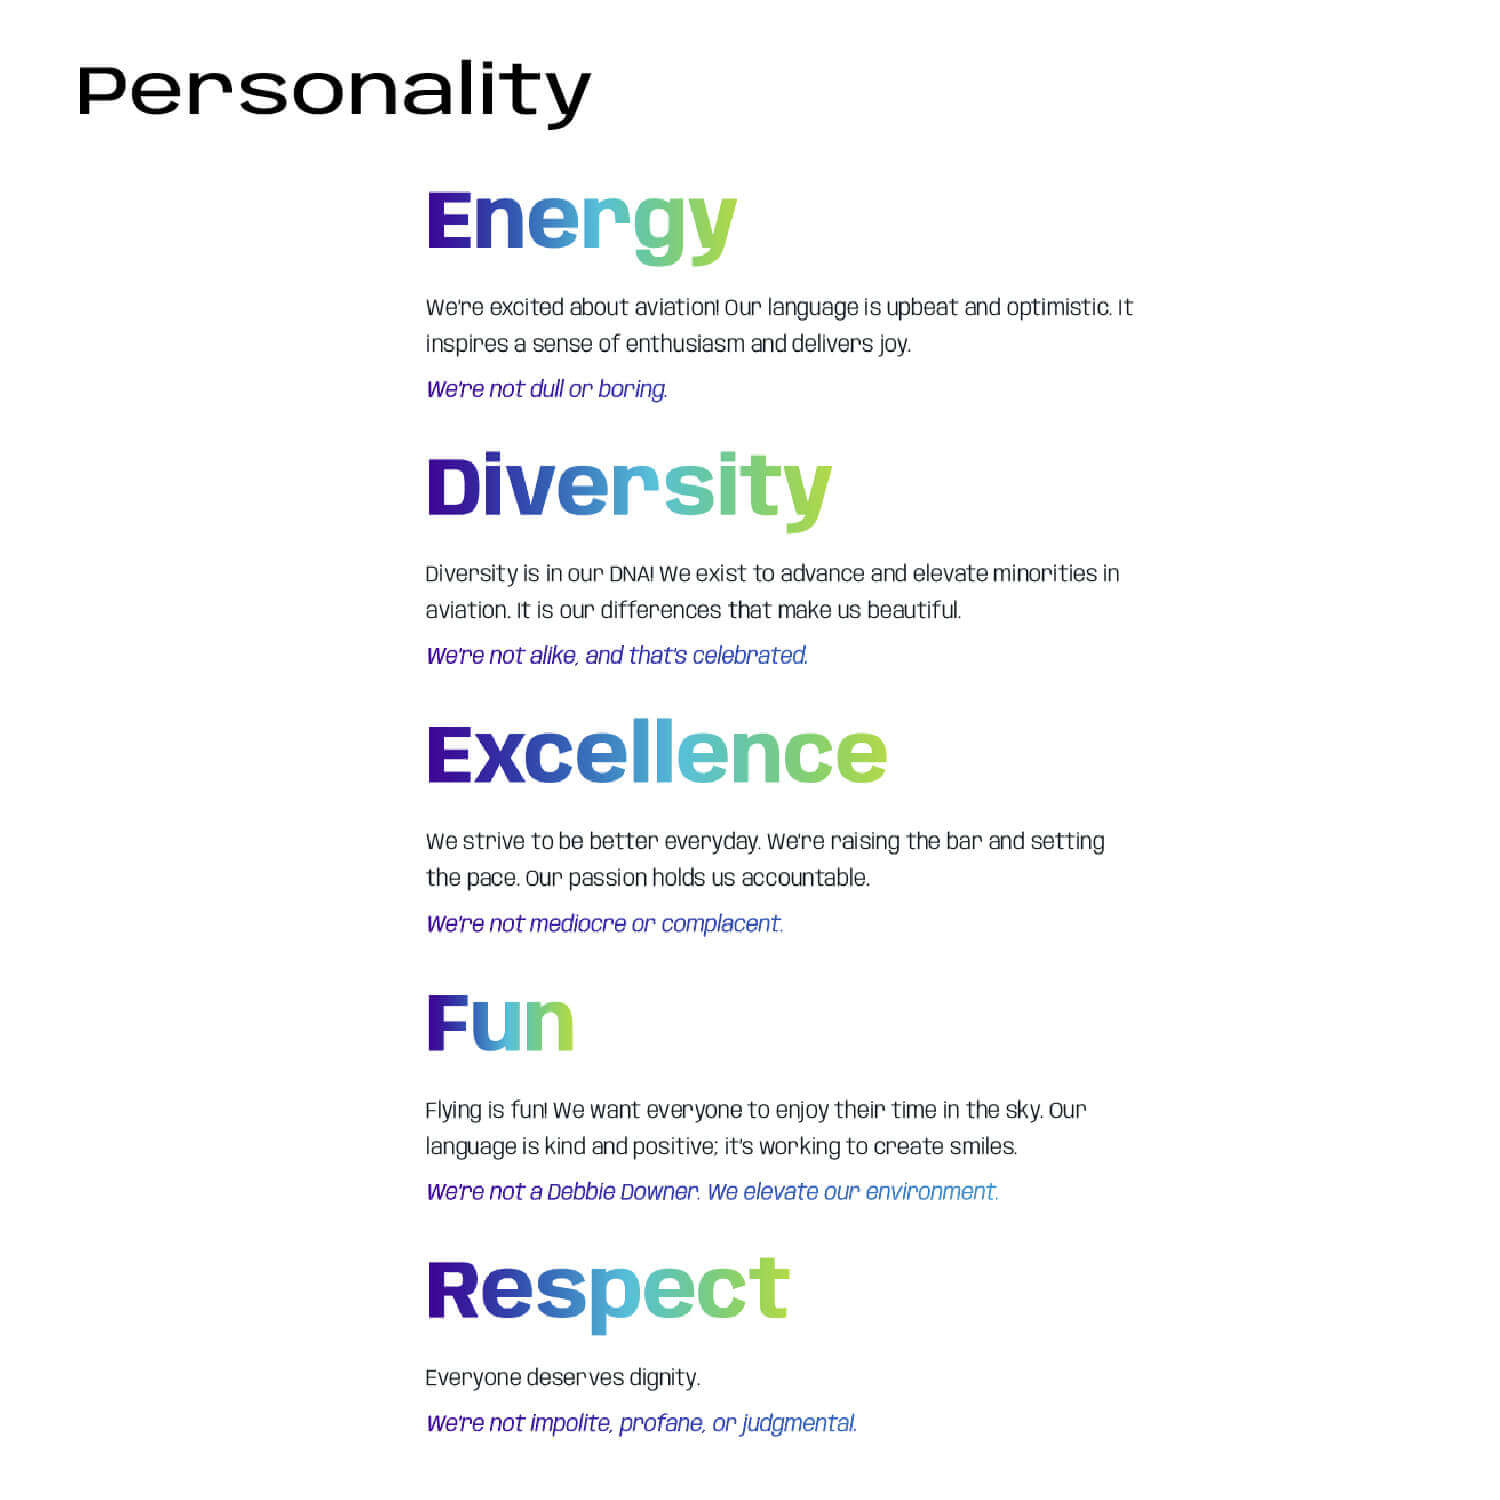 Diversifly brand personality